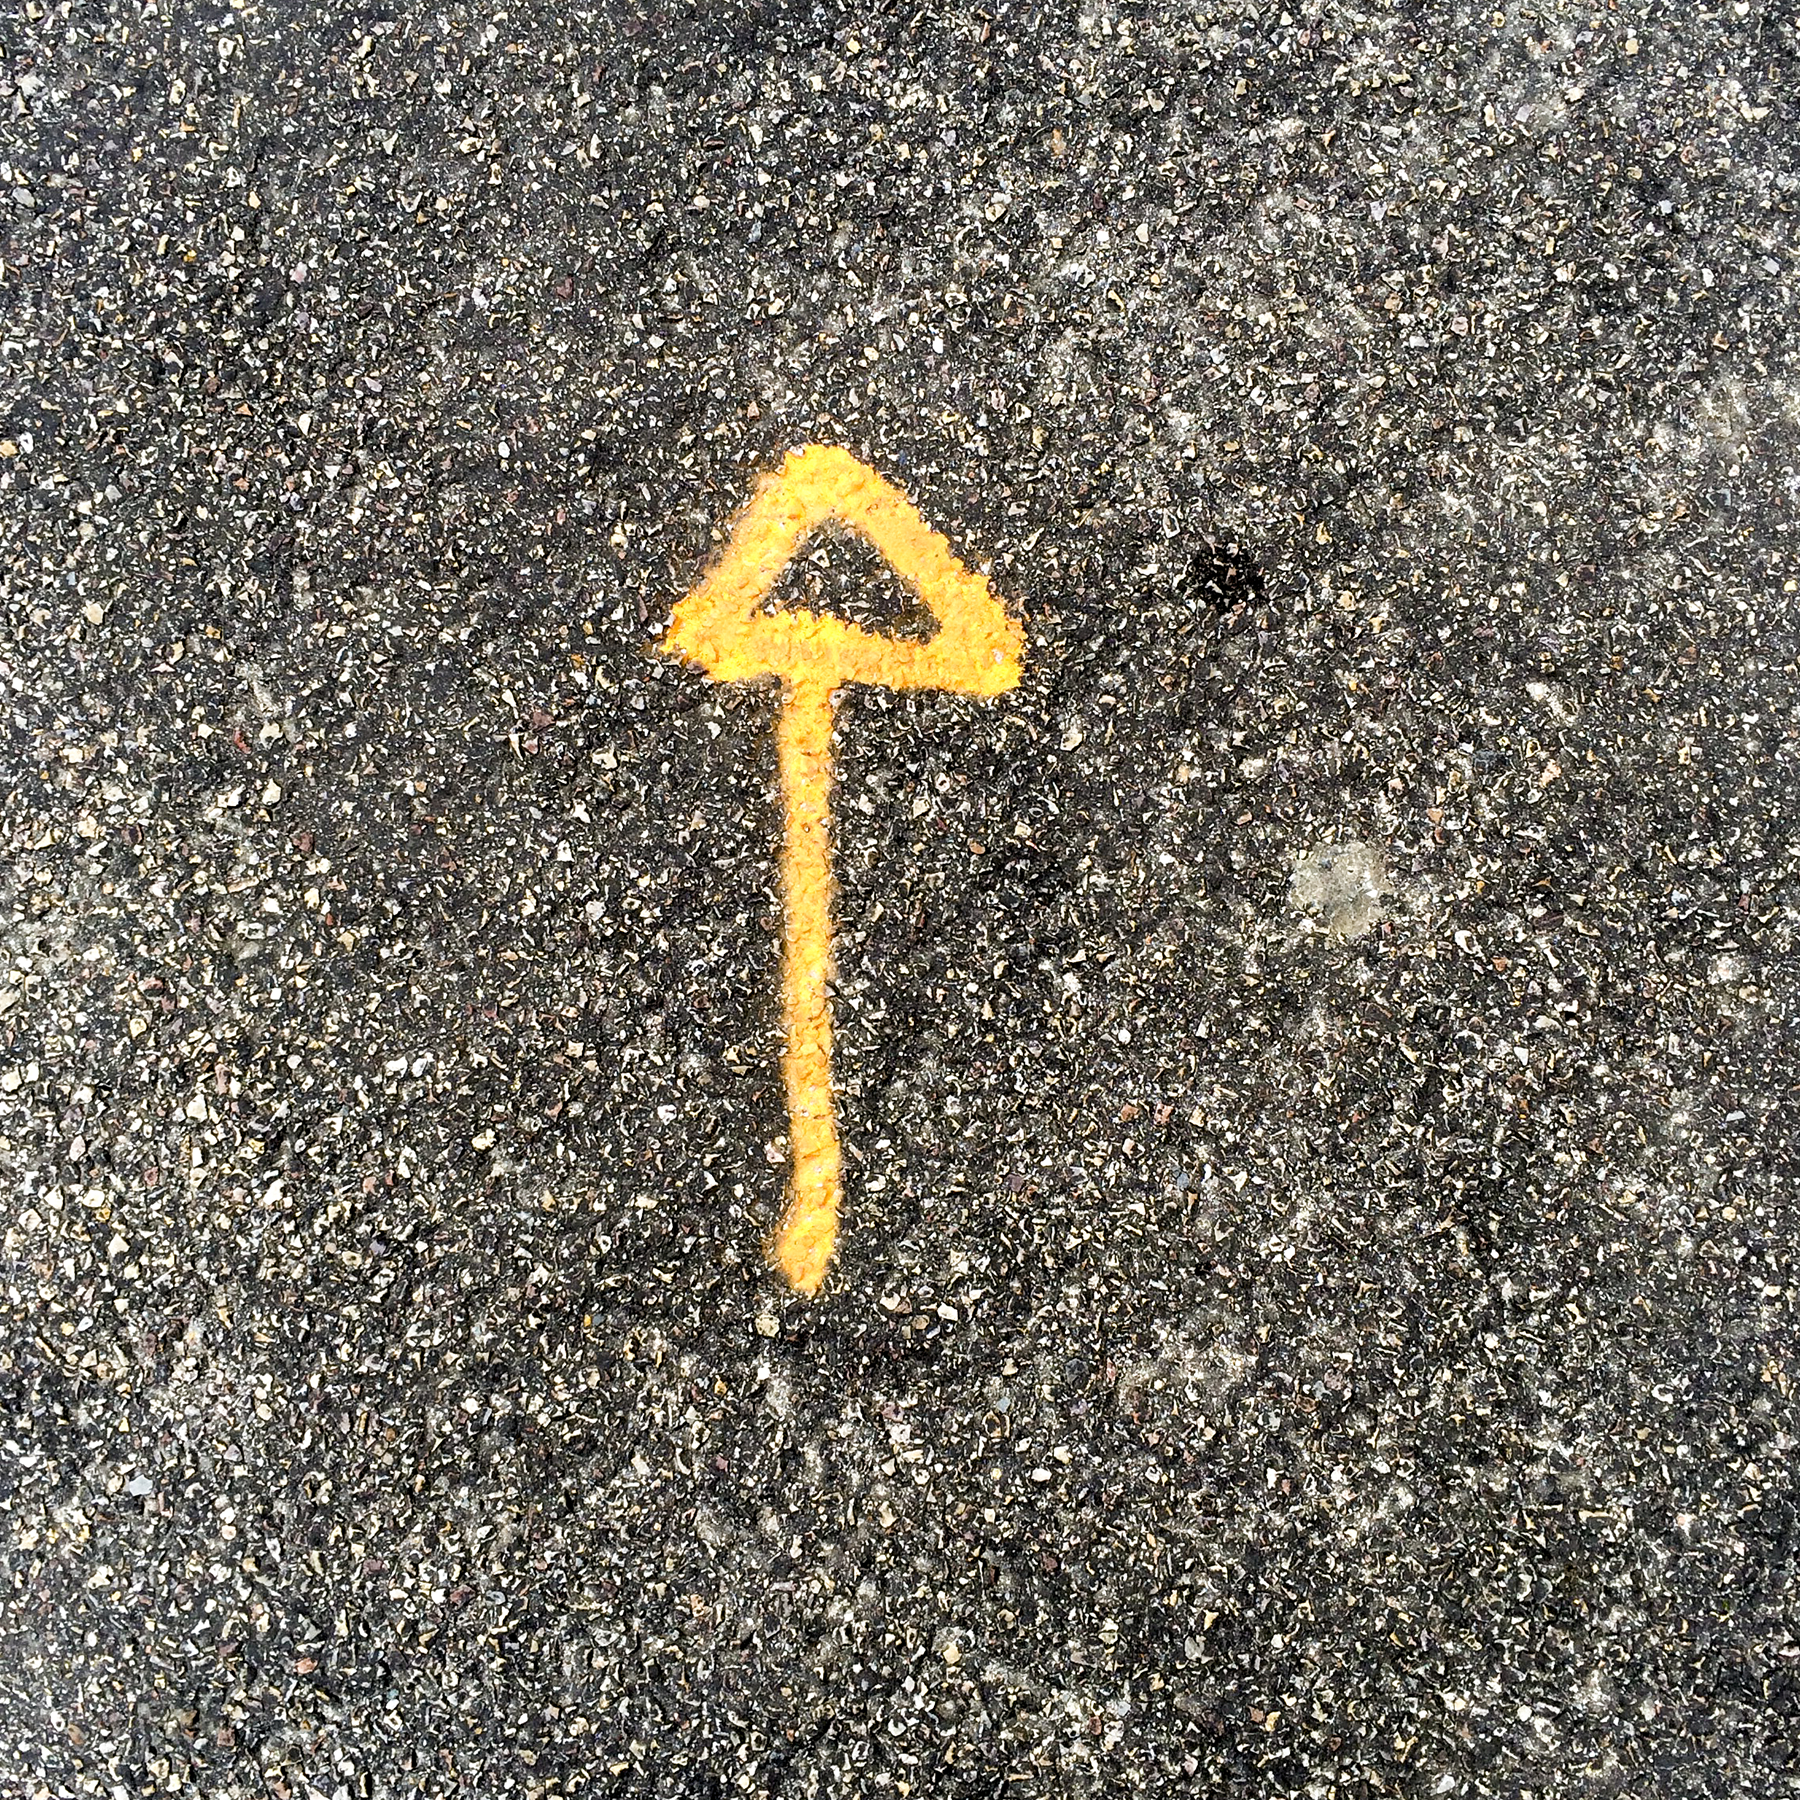 4th of 6 placeholder images: yellow arrow spraypainted on pavement